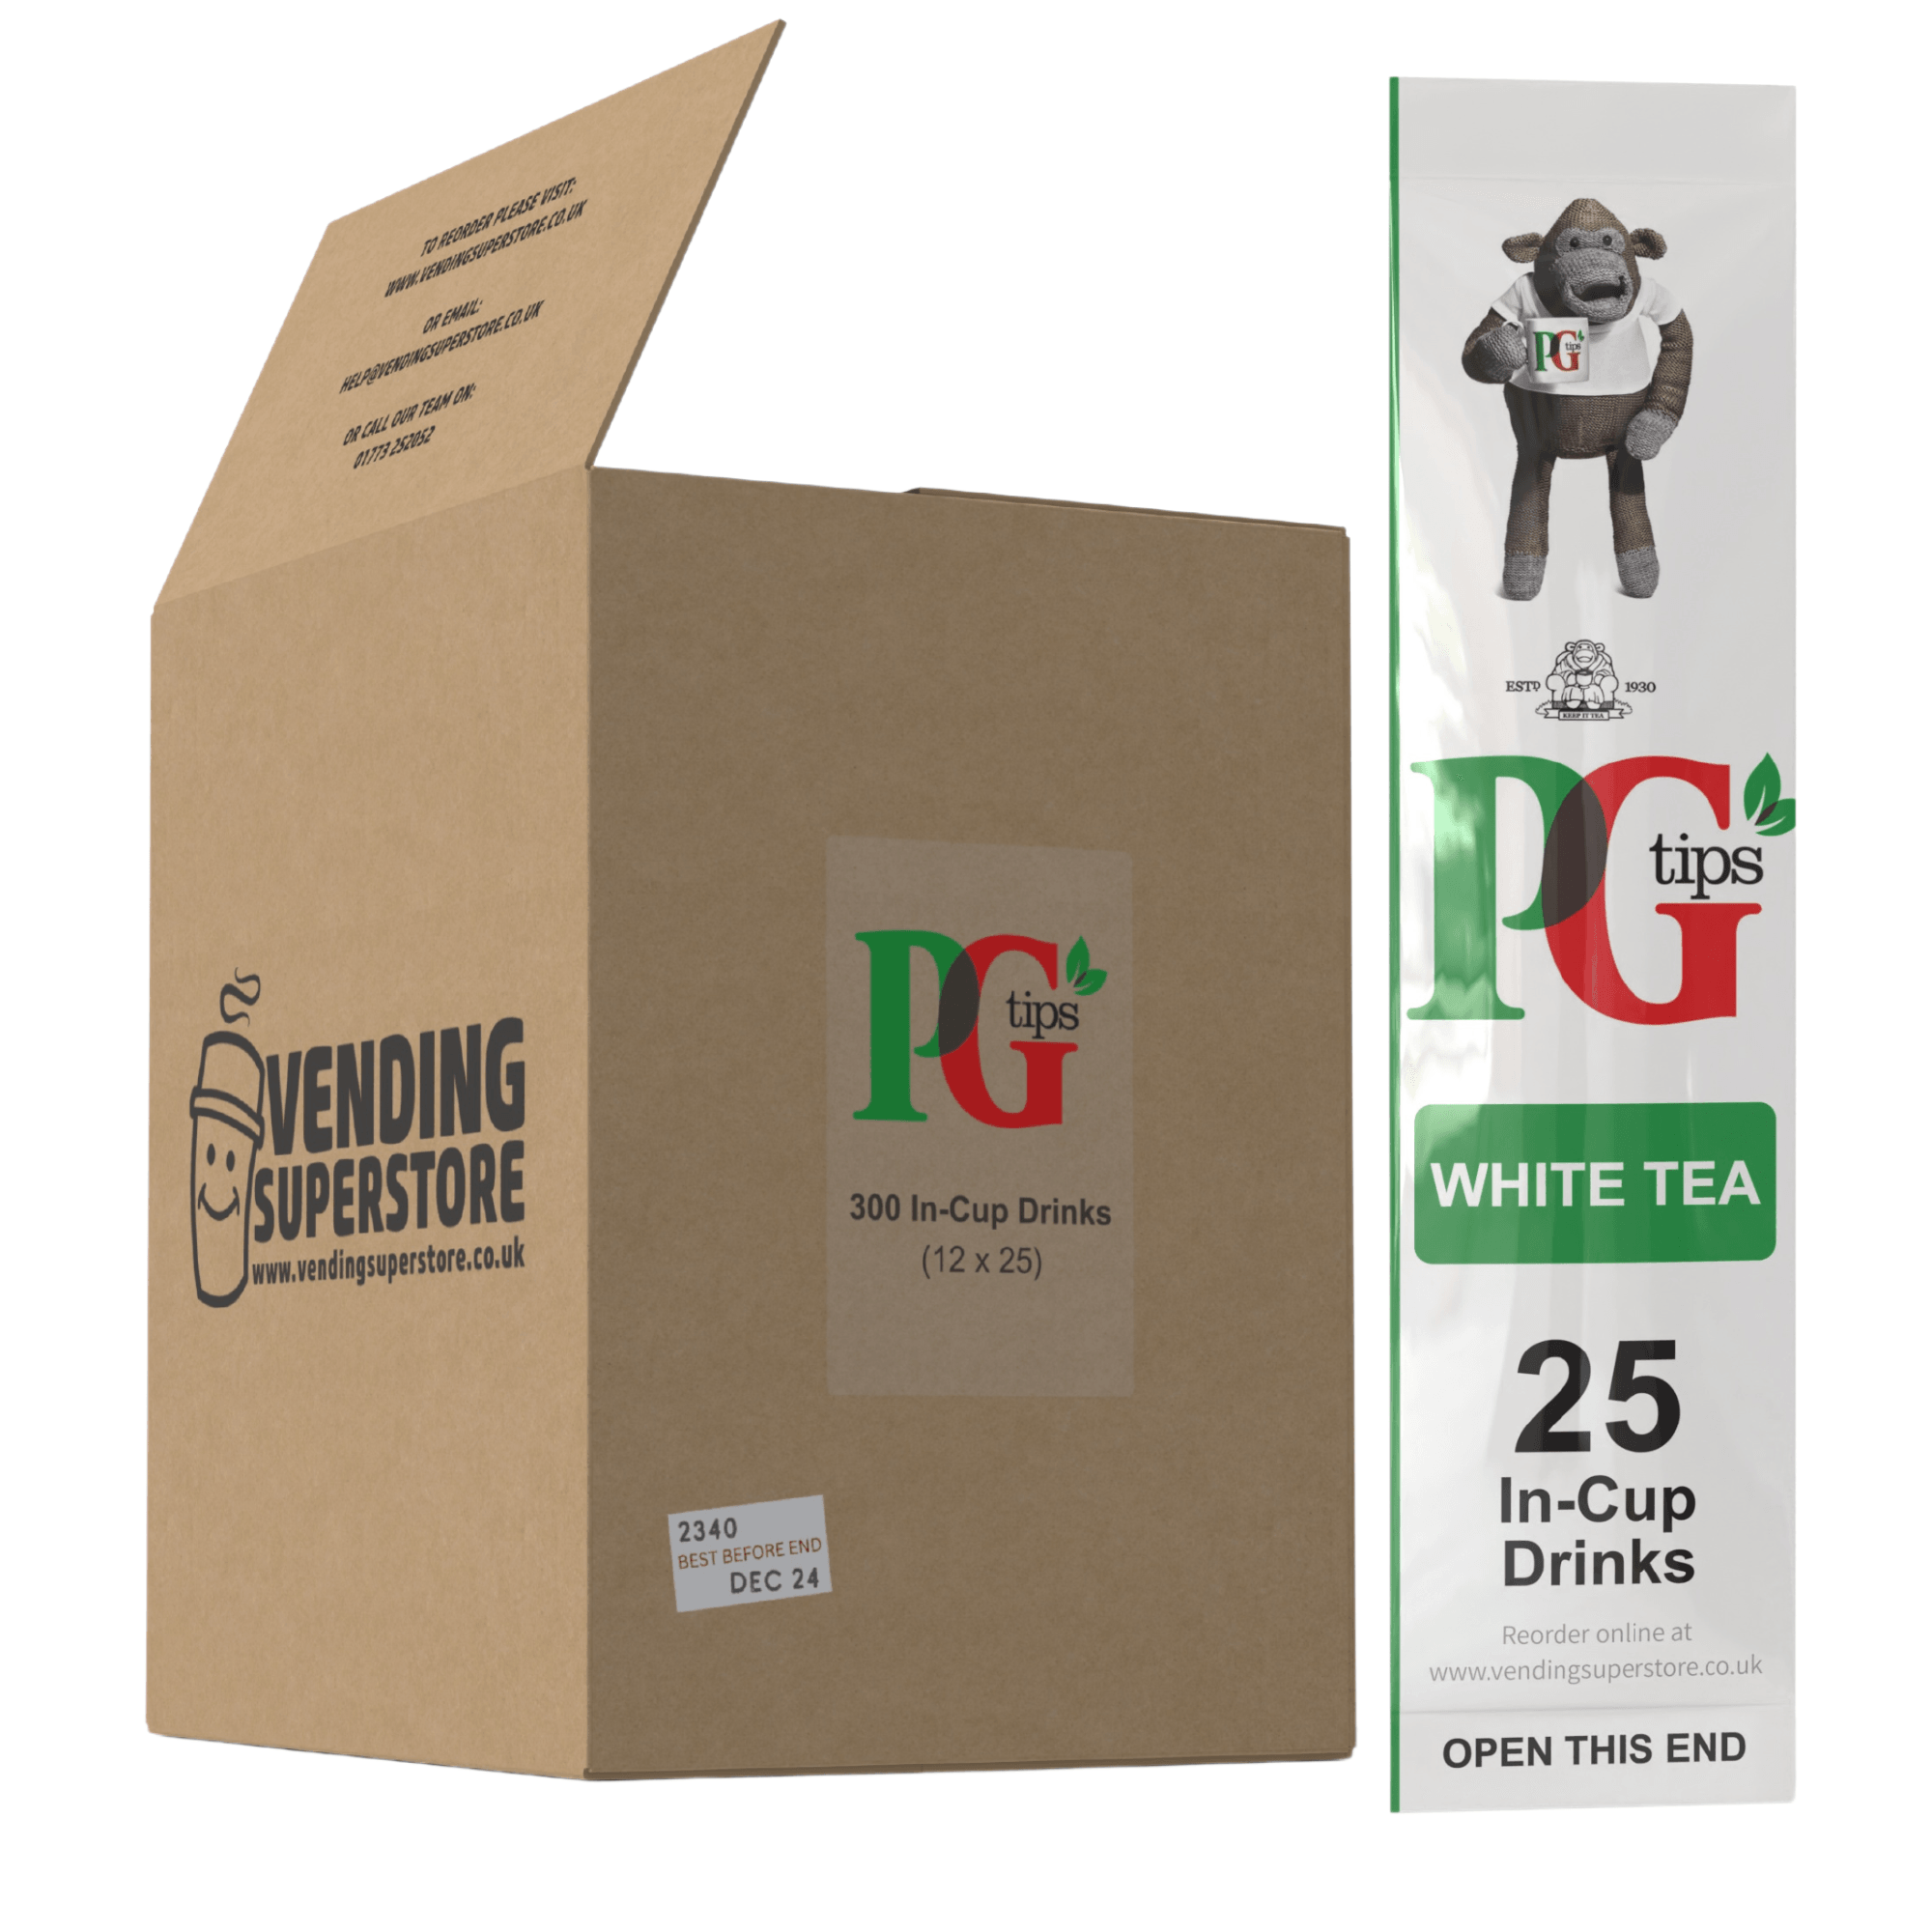 Incup Vending Drinks - PG Tips Tagged Tea White - Case Of 300 Cups - Vending Superstore